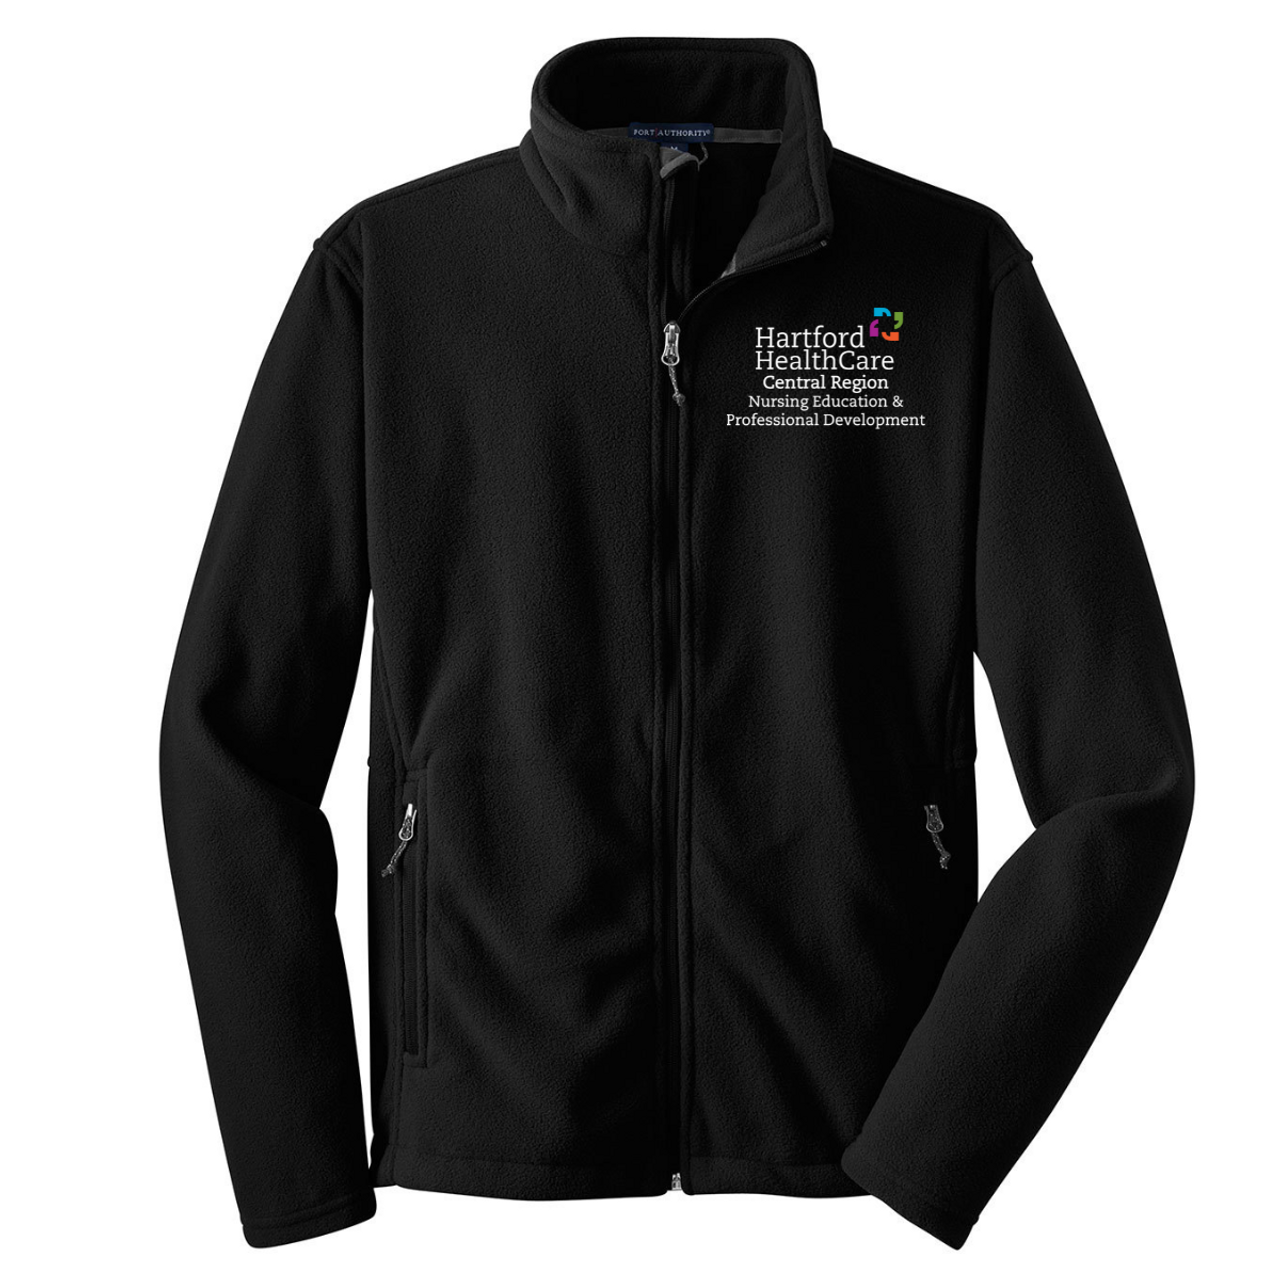 https://cdn11.bigcommerce.com/s-ign1he/images/stencil/1280x1280/products/4350/11716/HHC_Central_Region_Black_Jacket__23736.1658515146.png?c=2